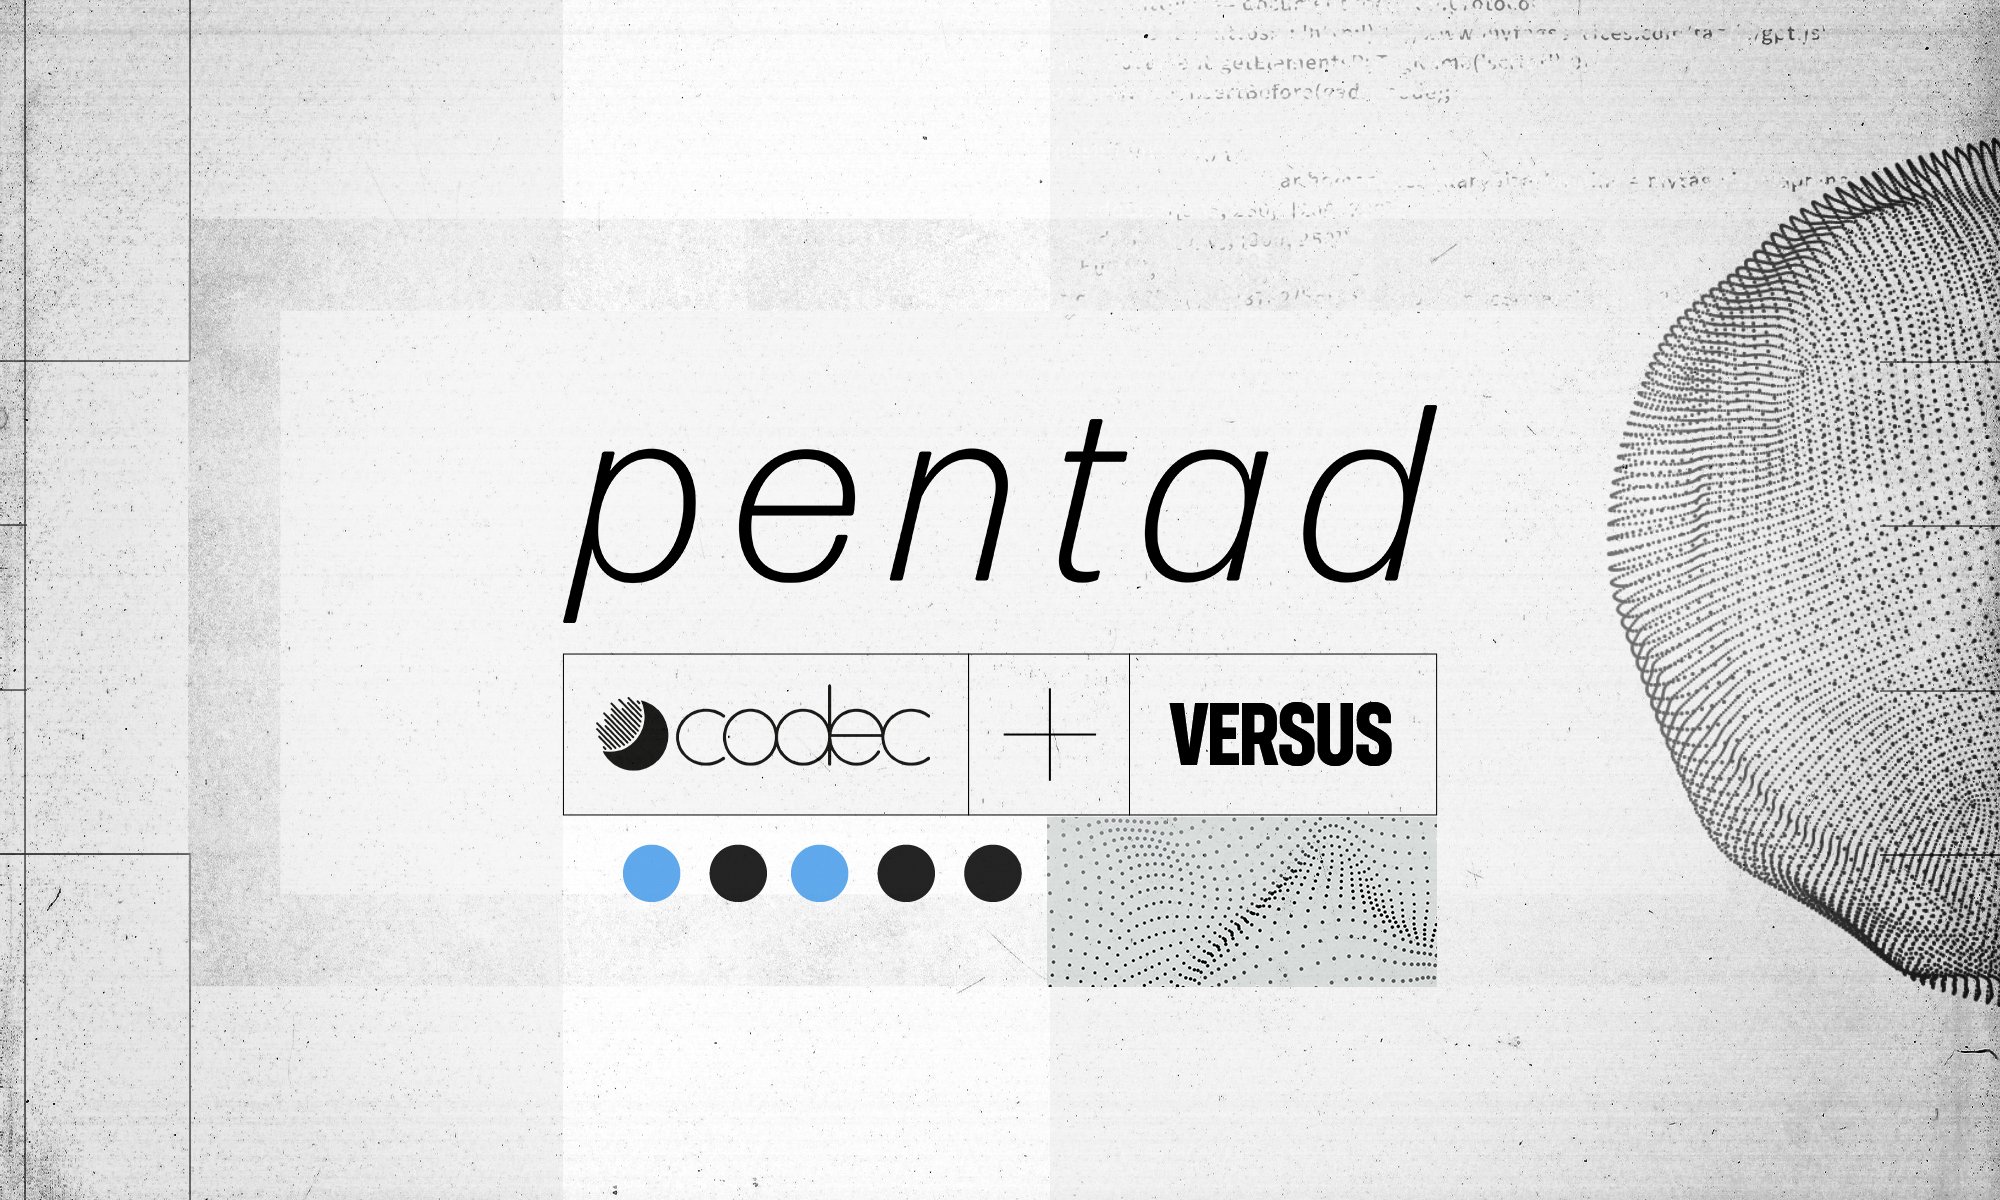 Codec is joining Pentad